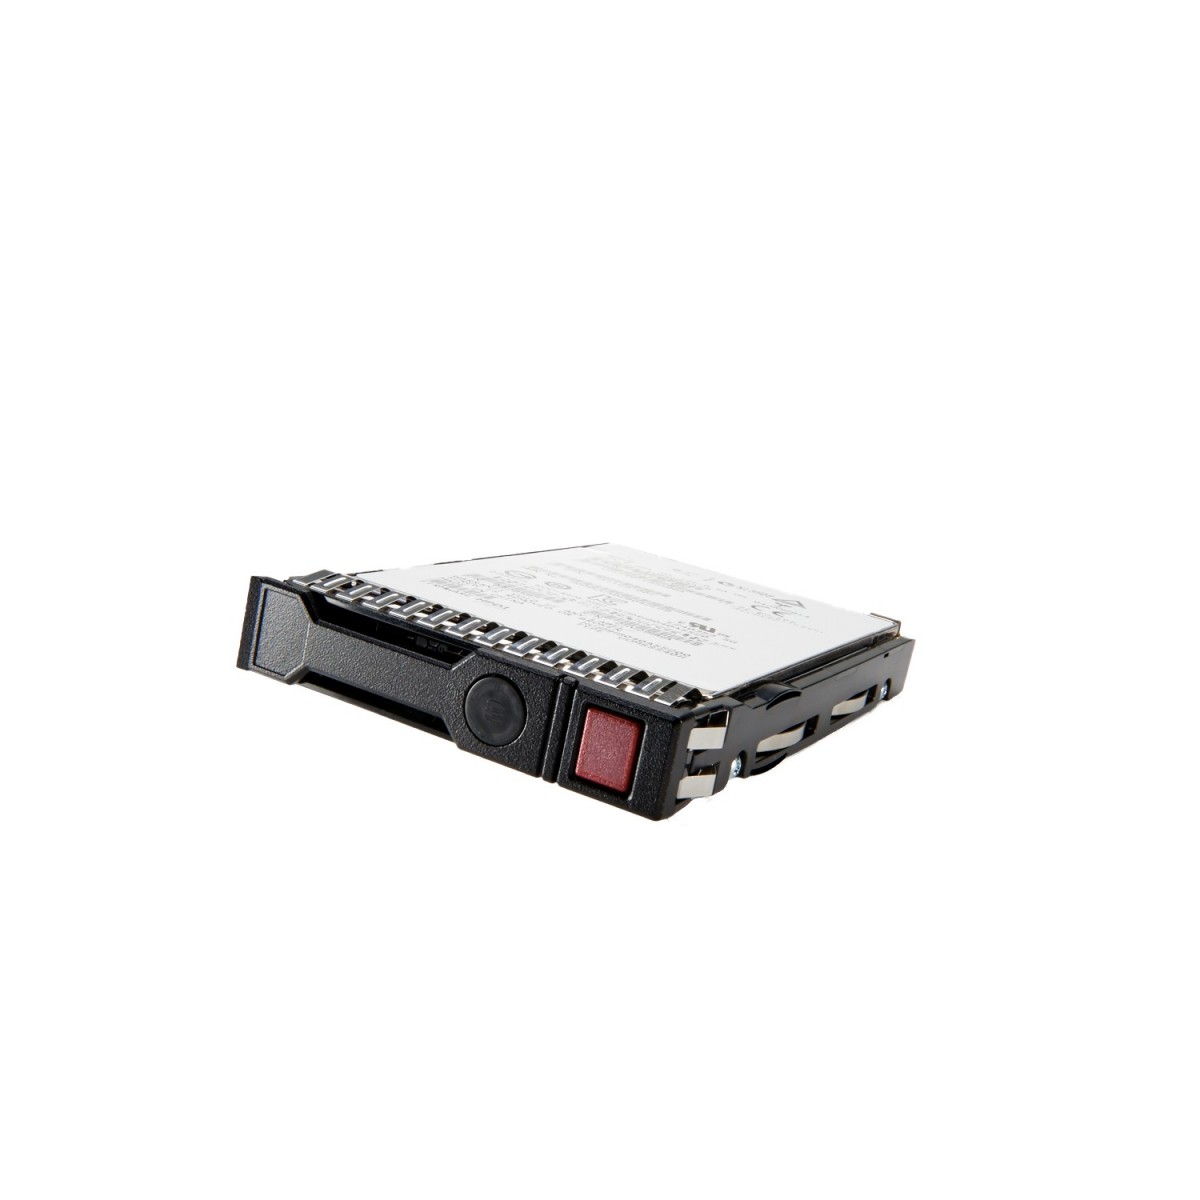 HPE DR SSD 400GB 12G 2.5 SAS MSA - Solid State Disk - Serial Attached SCSI (SAS)